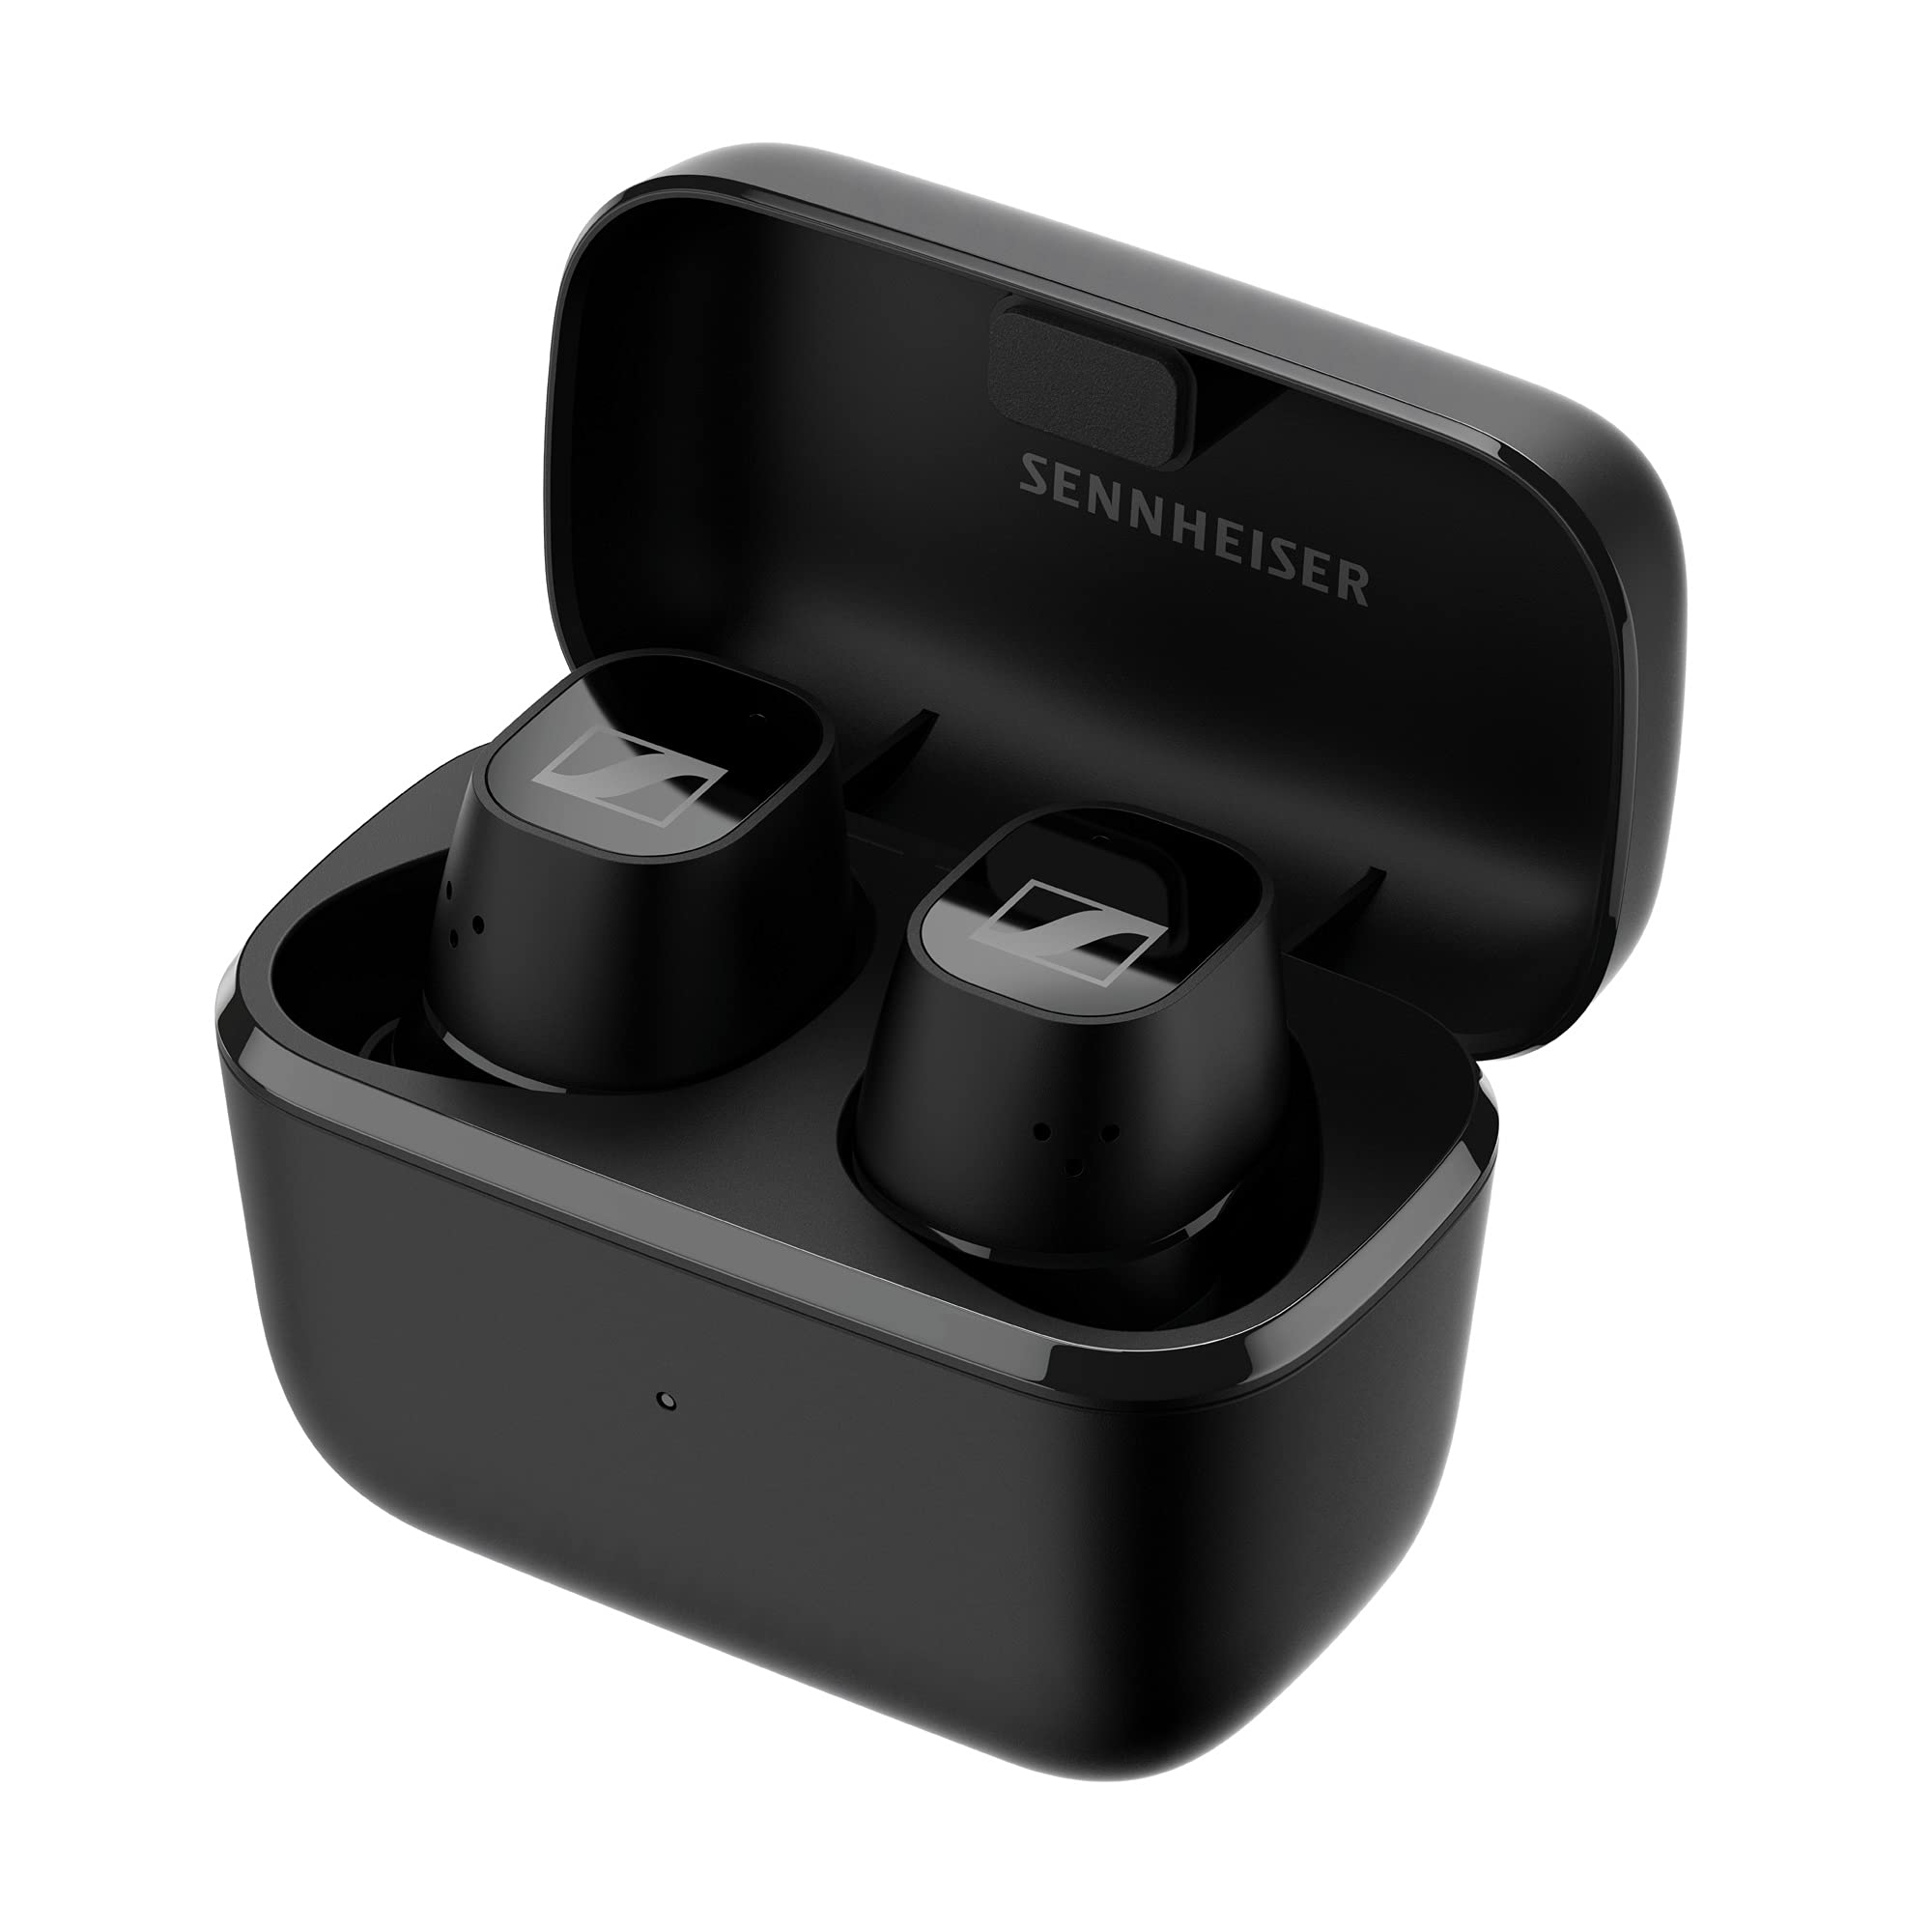 Sennheiser Consumer Audio Sennheiser CX Plus True Wireless Earbuds - Bluetooth in-Ear Headphones for Music and Calls with Active Noise Cancellation